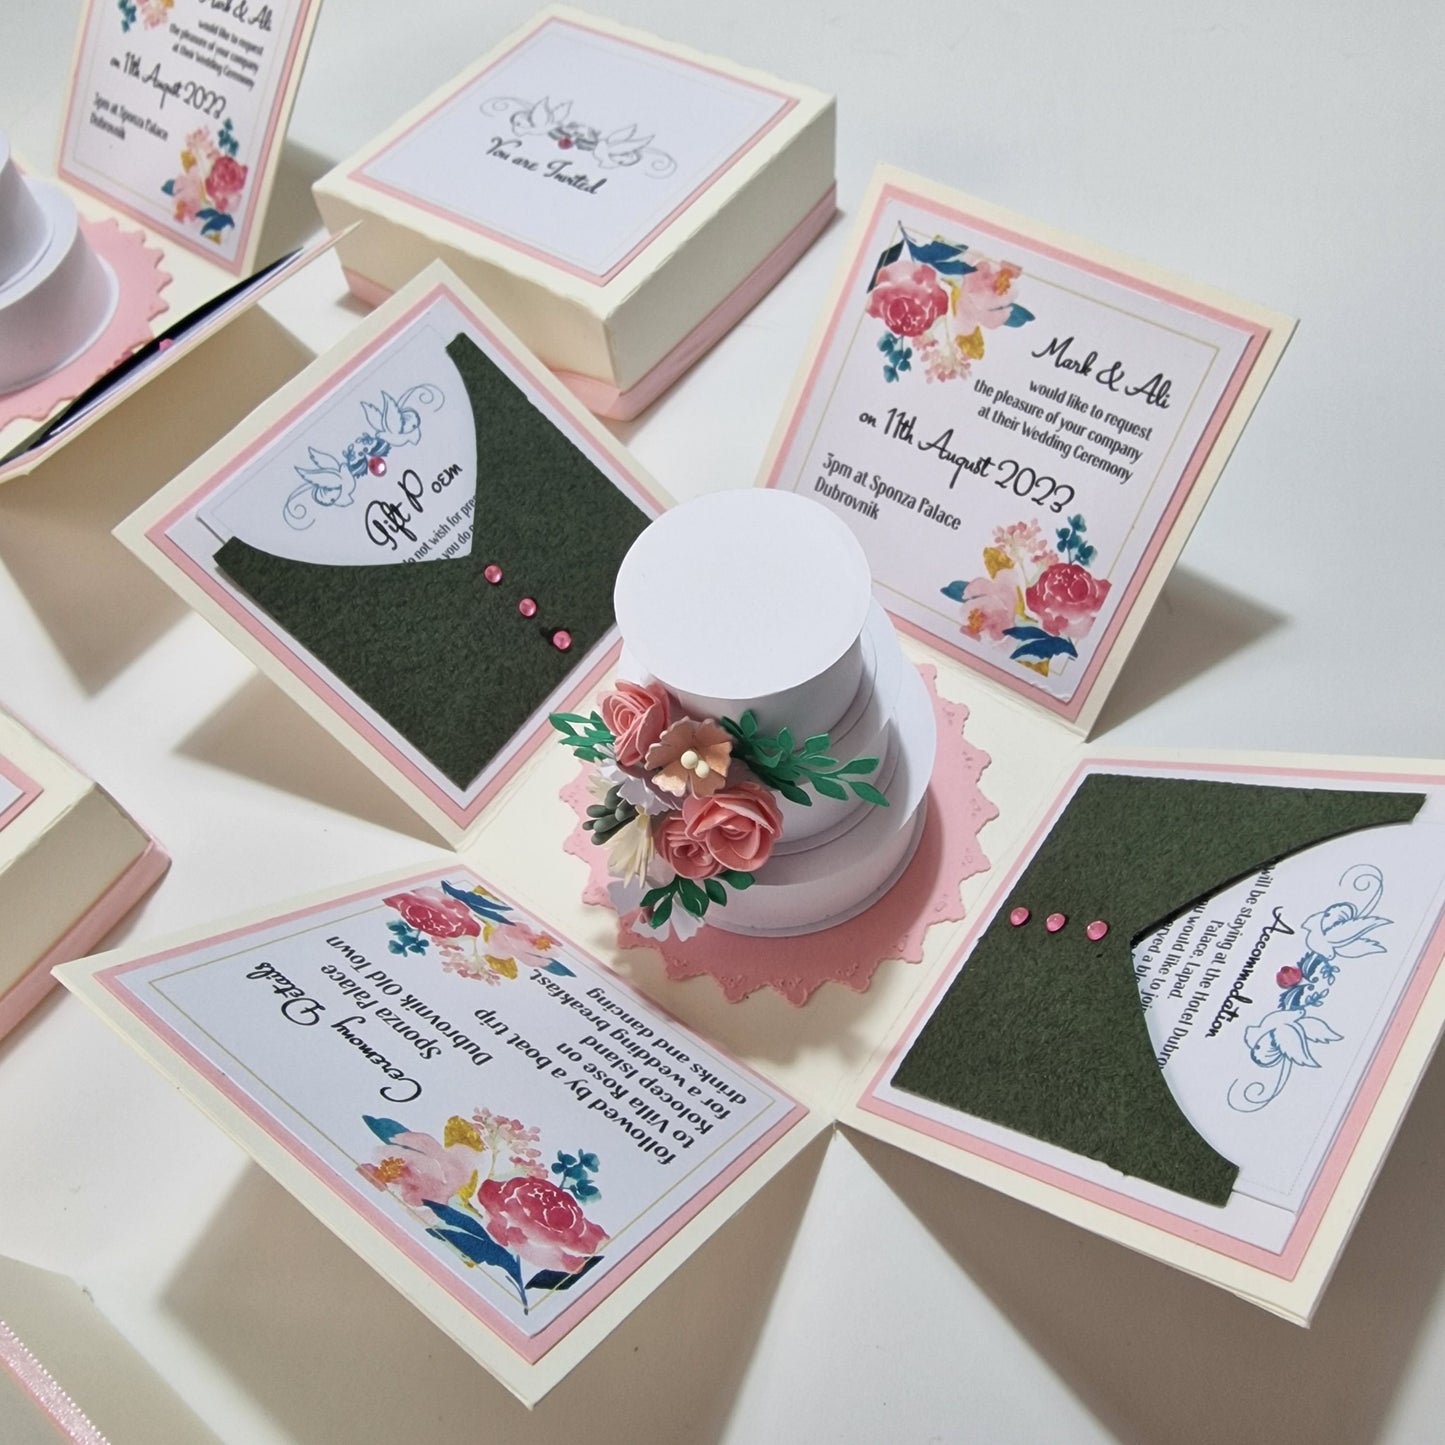 Bohemian Styled Exploding Wedding Invitations do contain a few of the design elements from the Hearts &amp; Doves range however the biggest difference is laid back styling with Central Circular three-tier Wedding cake. The Box is finished off in pastel colours to add a more relaxed feeling.